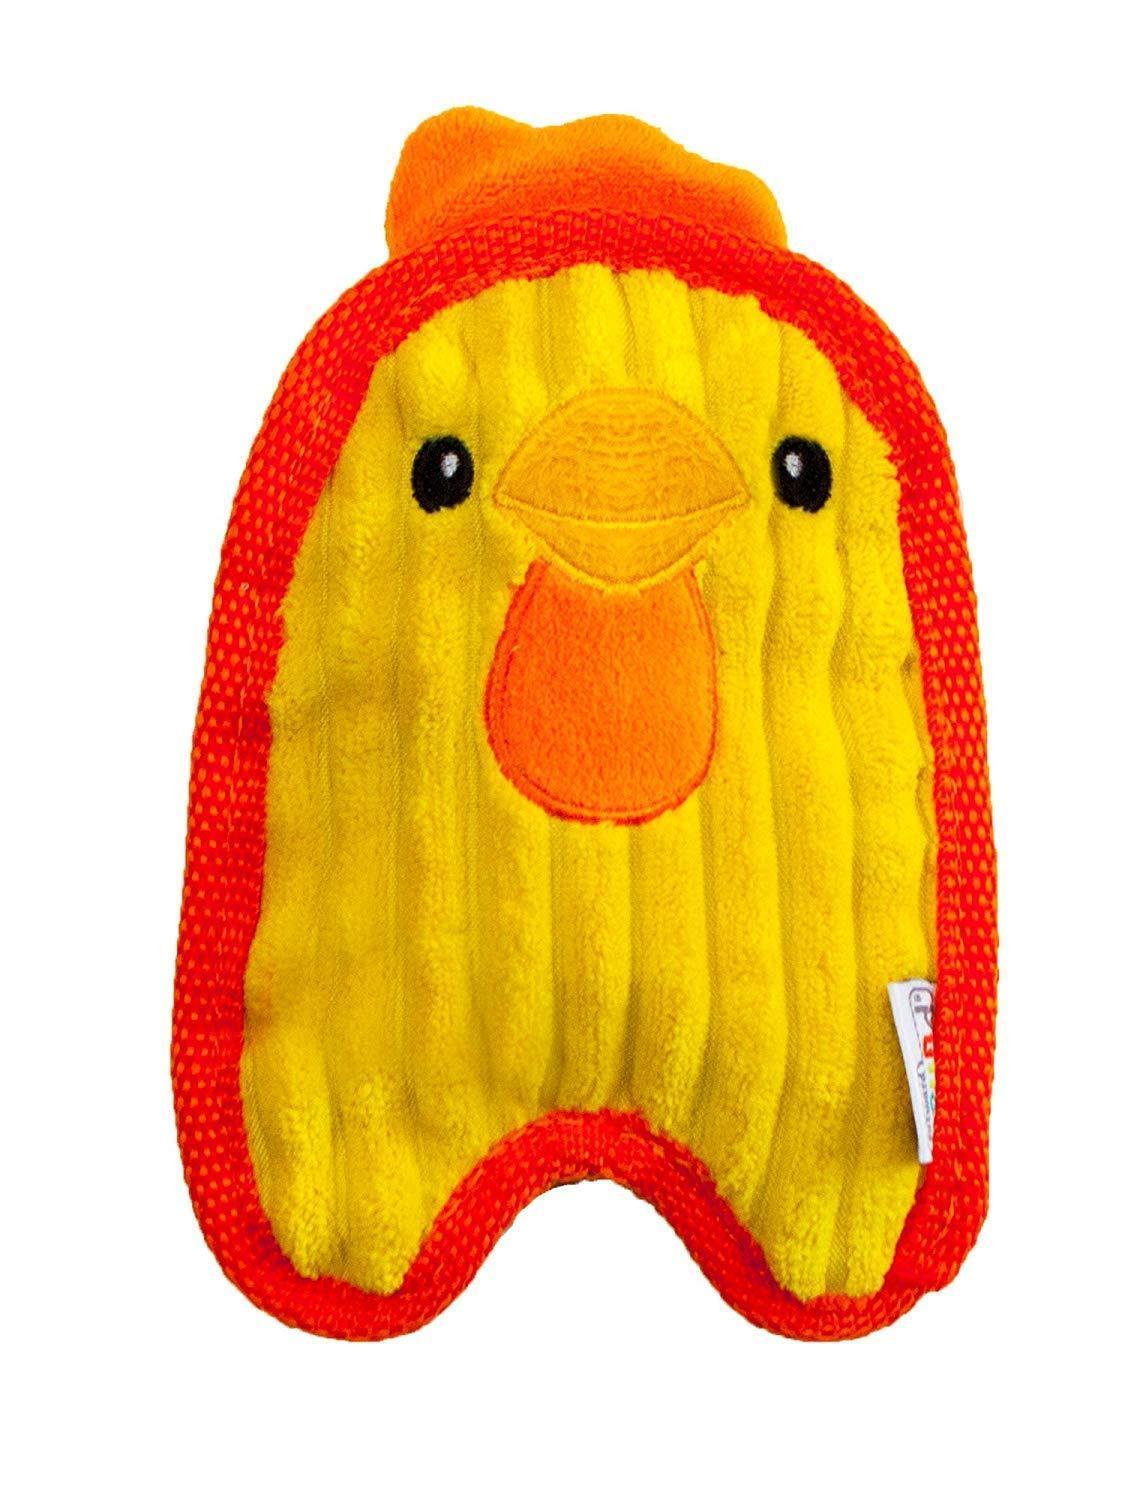 Outward Hound Invincibles Mini Chicky - Squeaker Toys